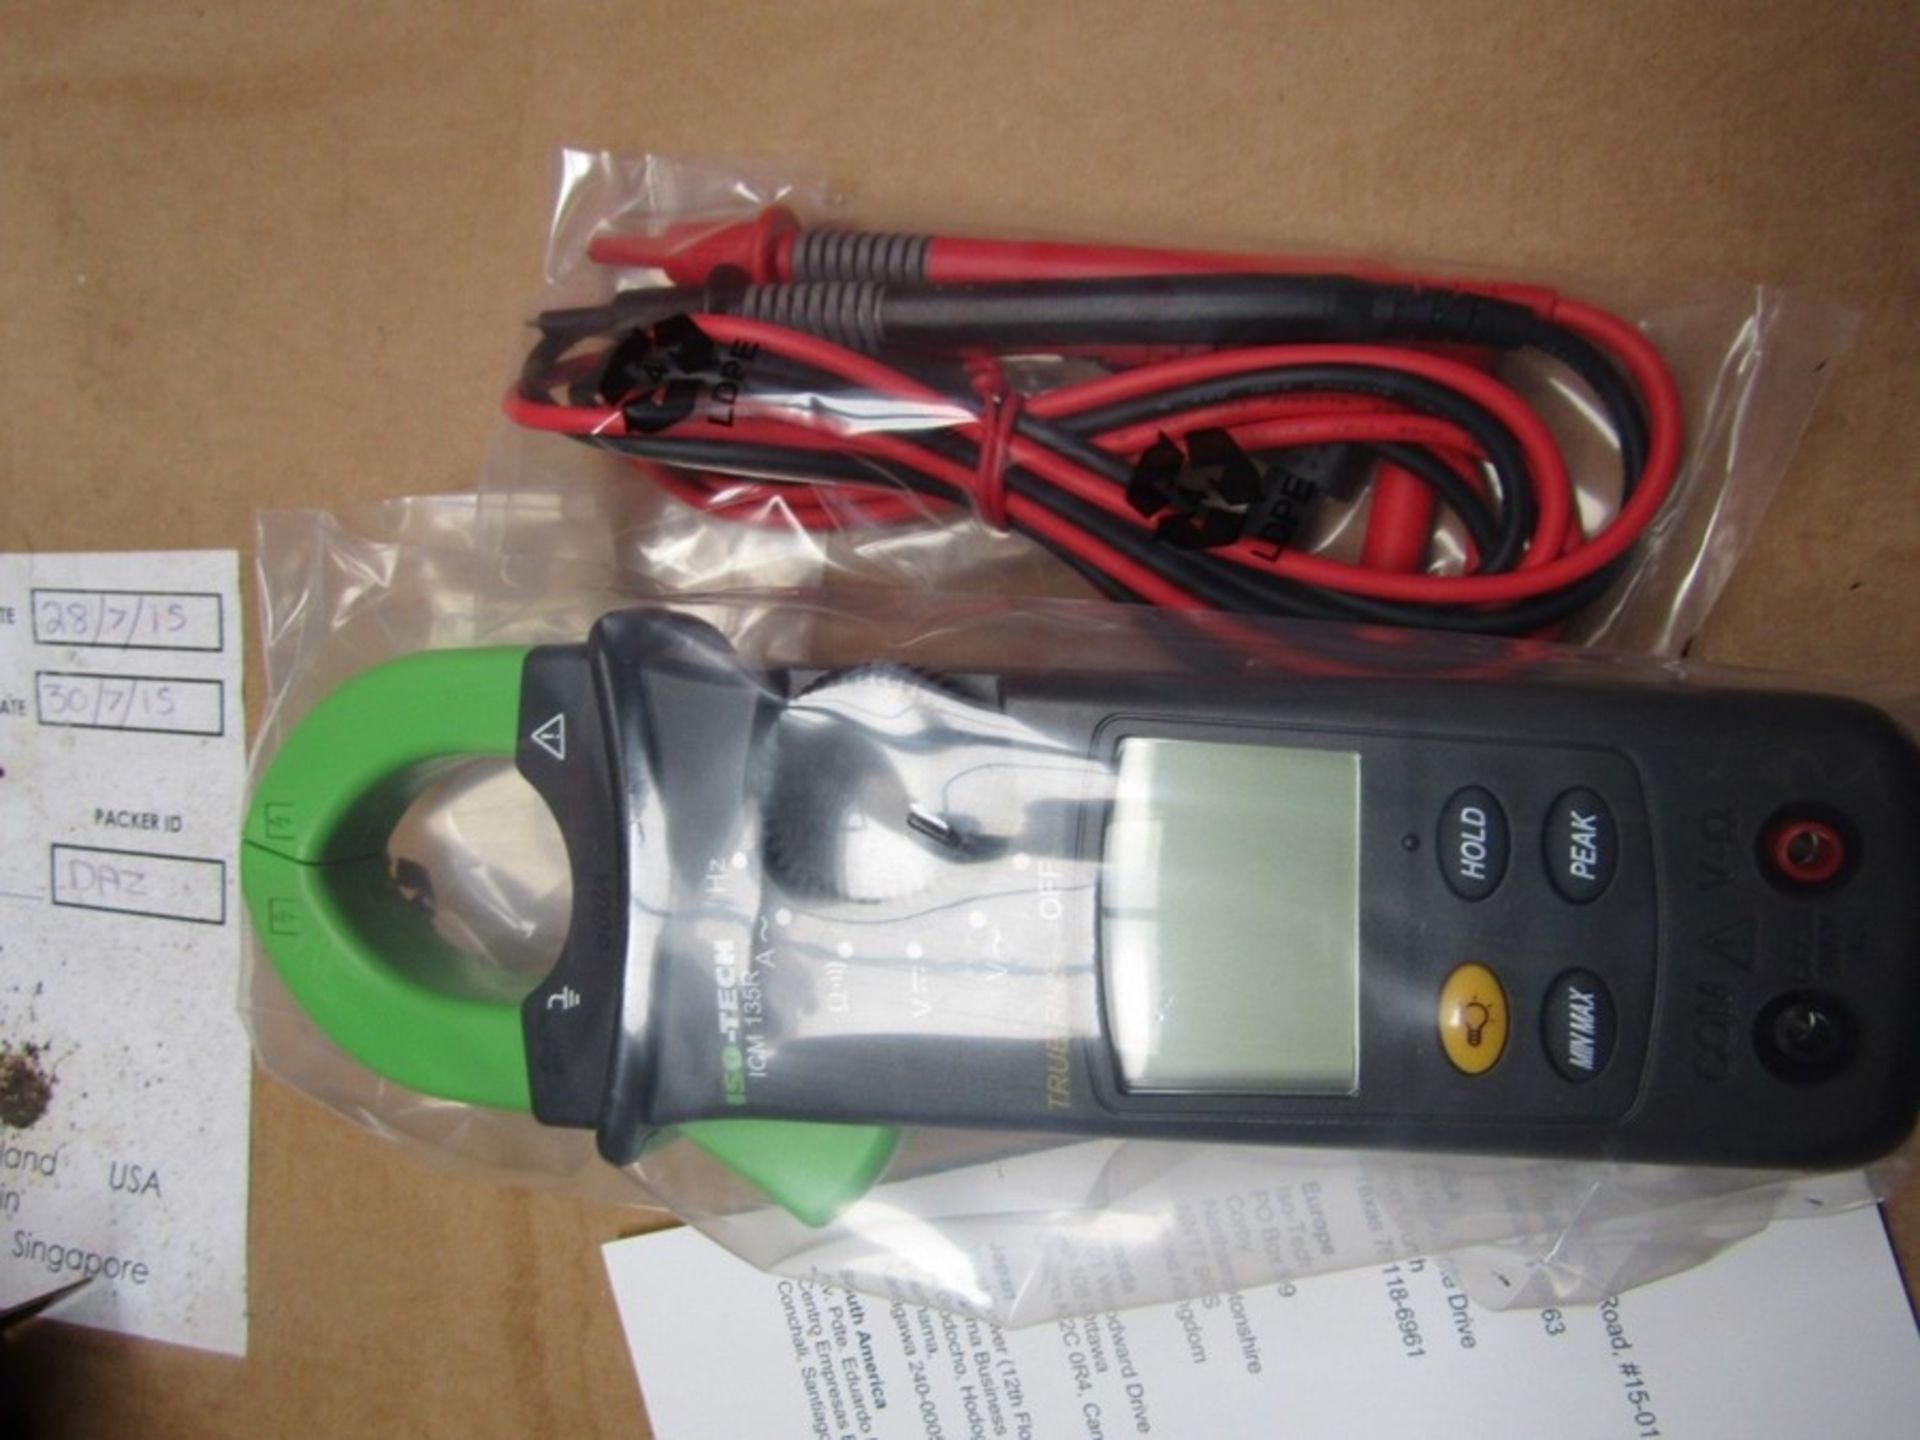 ISO-TECH ICM135R Clamp Meter, Max Current 600A ac CAT III 600V S4 6973957